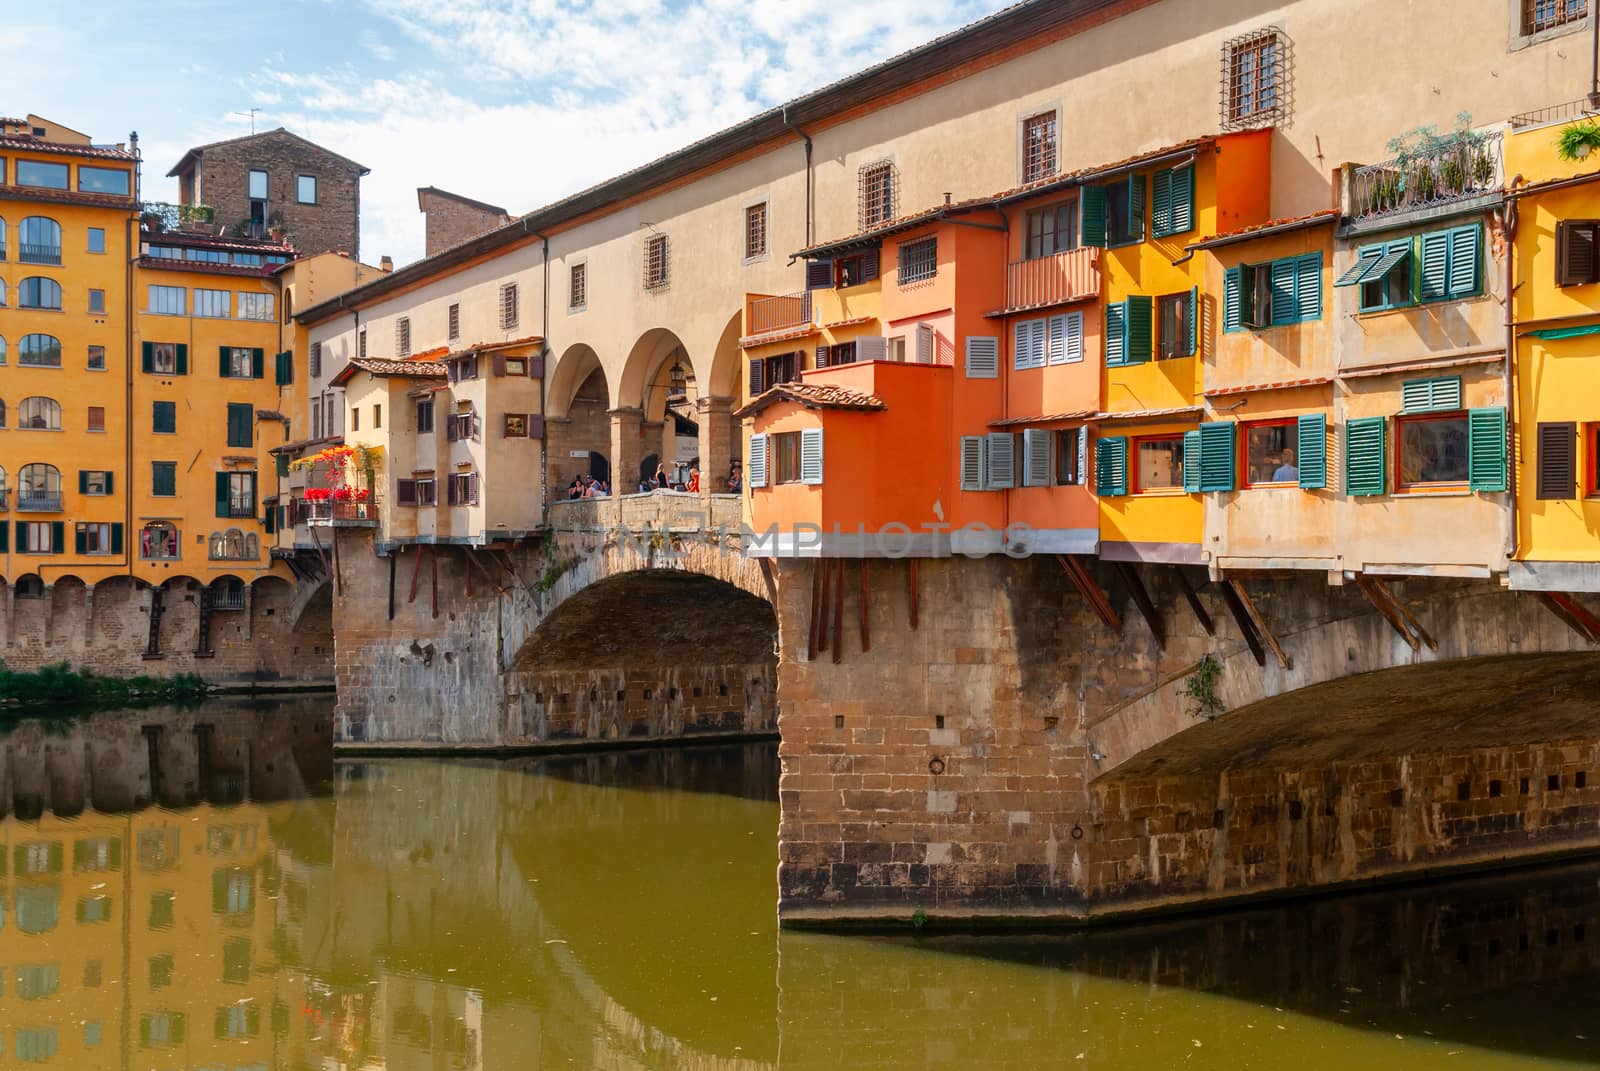 Details of the famous Old Bridge in Florence Ponte Vecchio by Zhukow